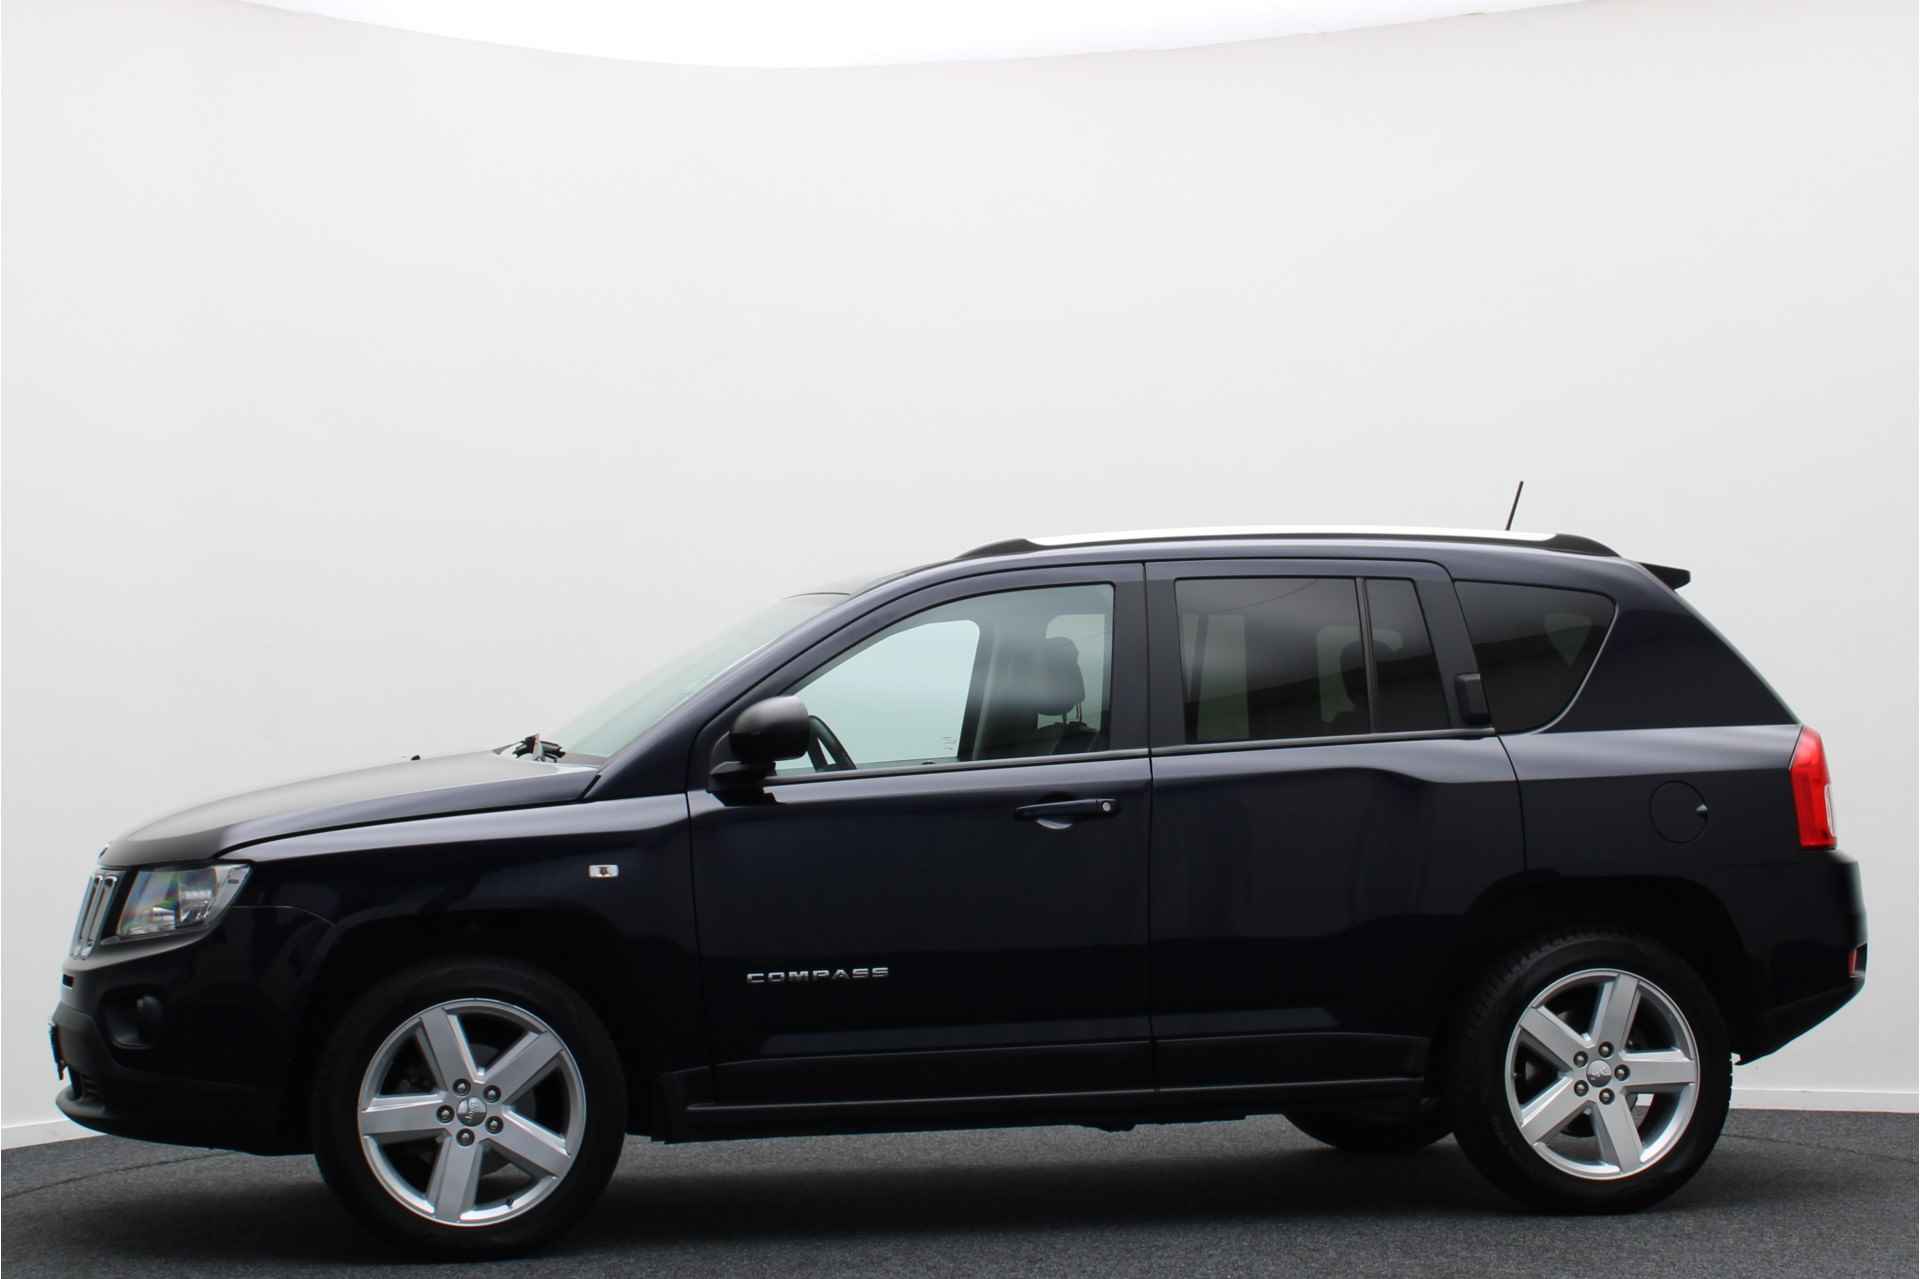 Jeep Compass 2.4 Limited 4WD Automaat Leer, Stoelverw., Climate, Cruise, Navigatie, Bluetooth, 18'' - 8/36